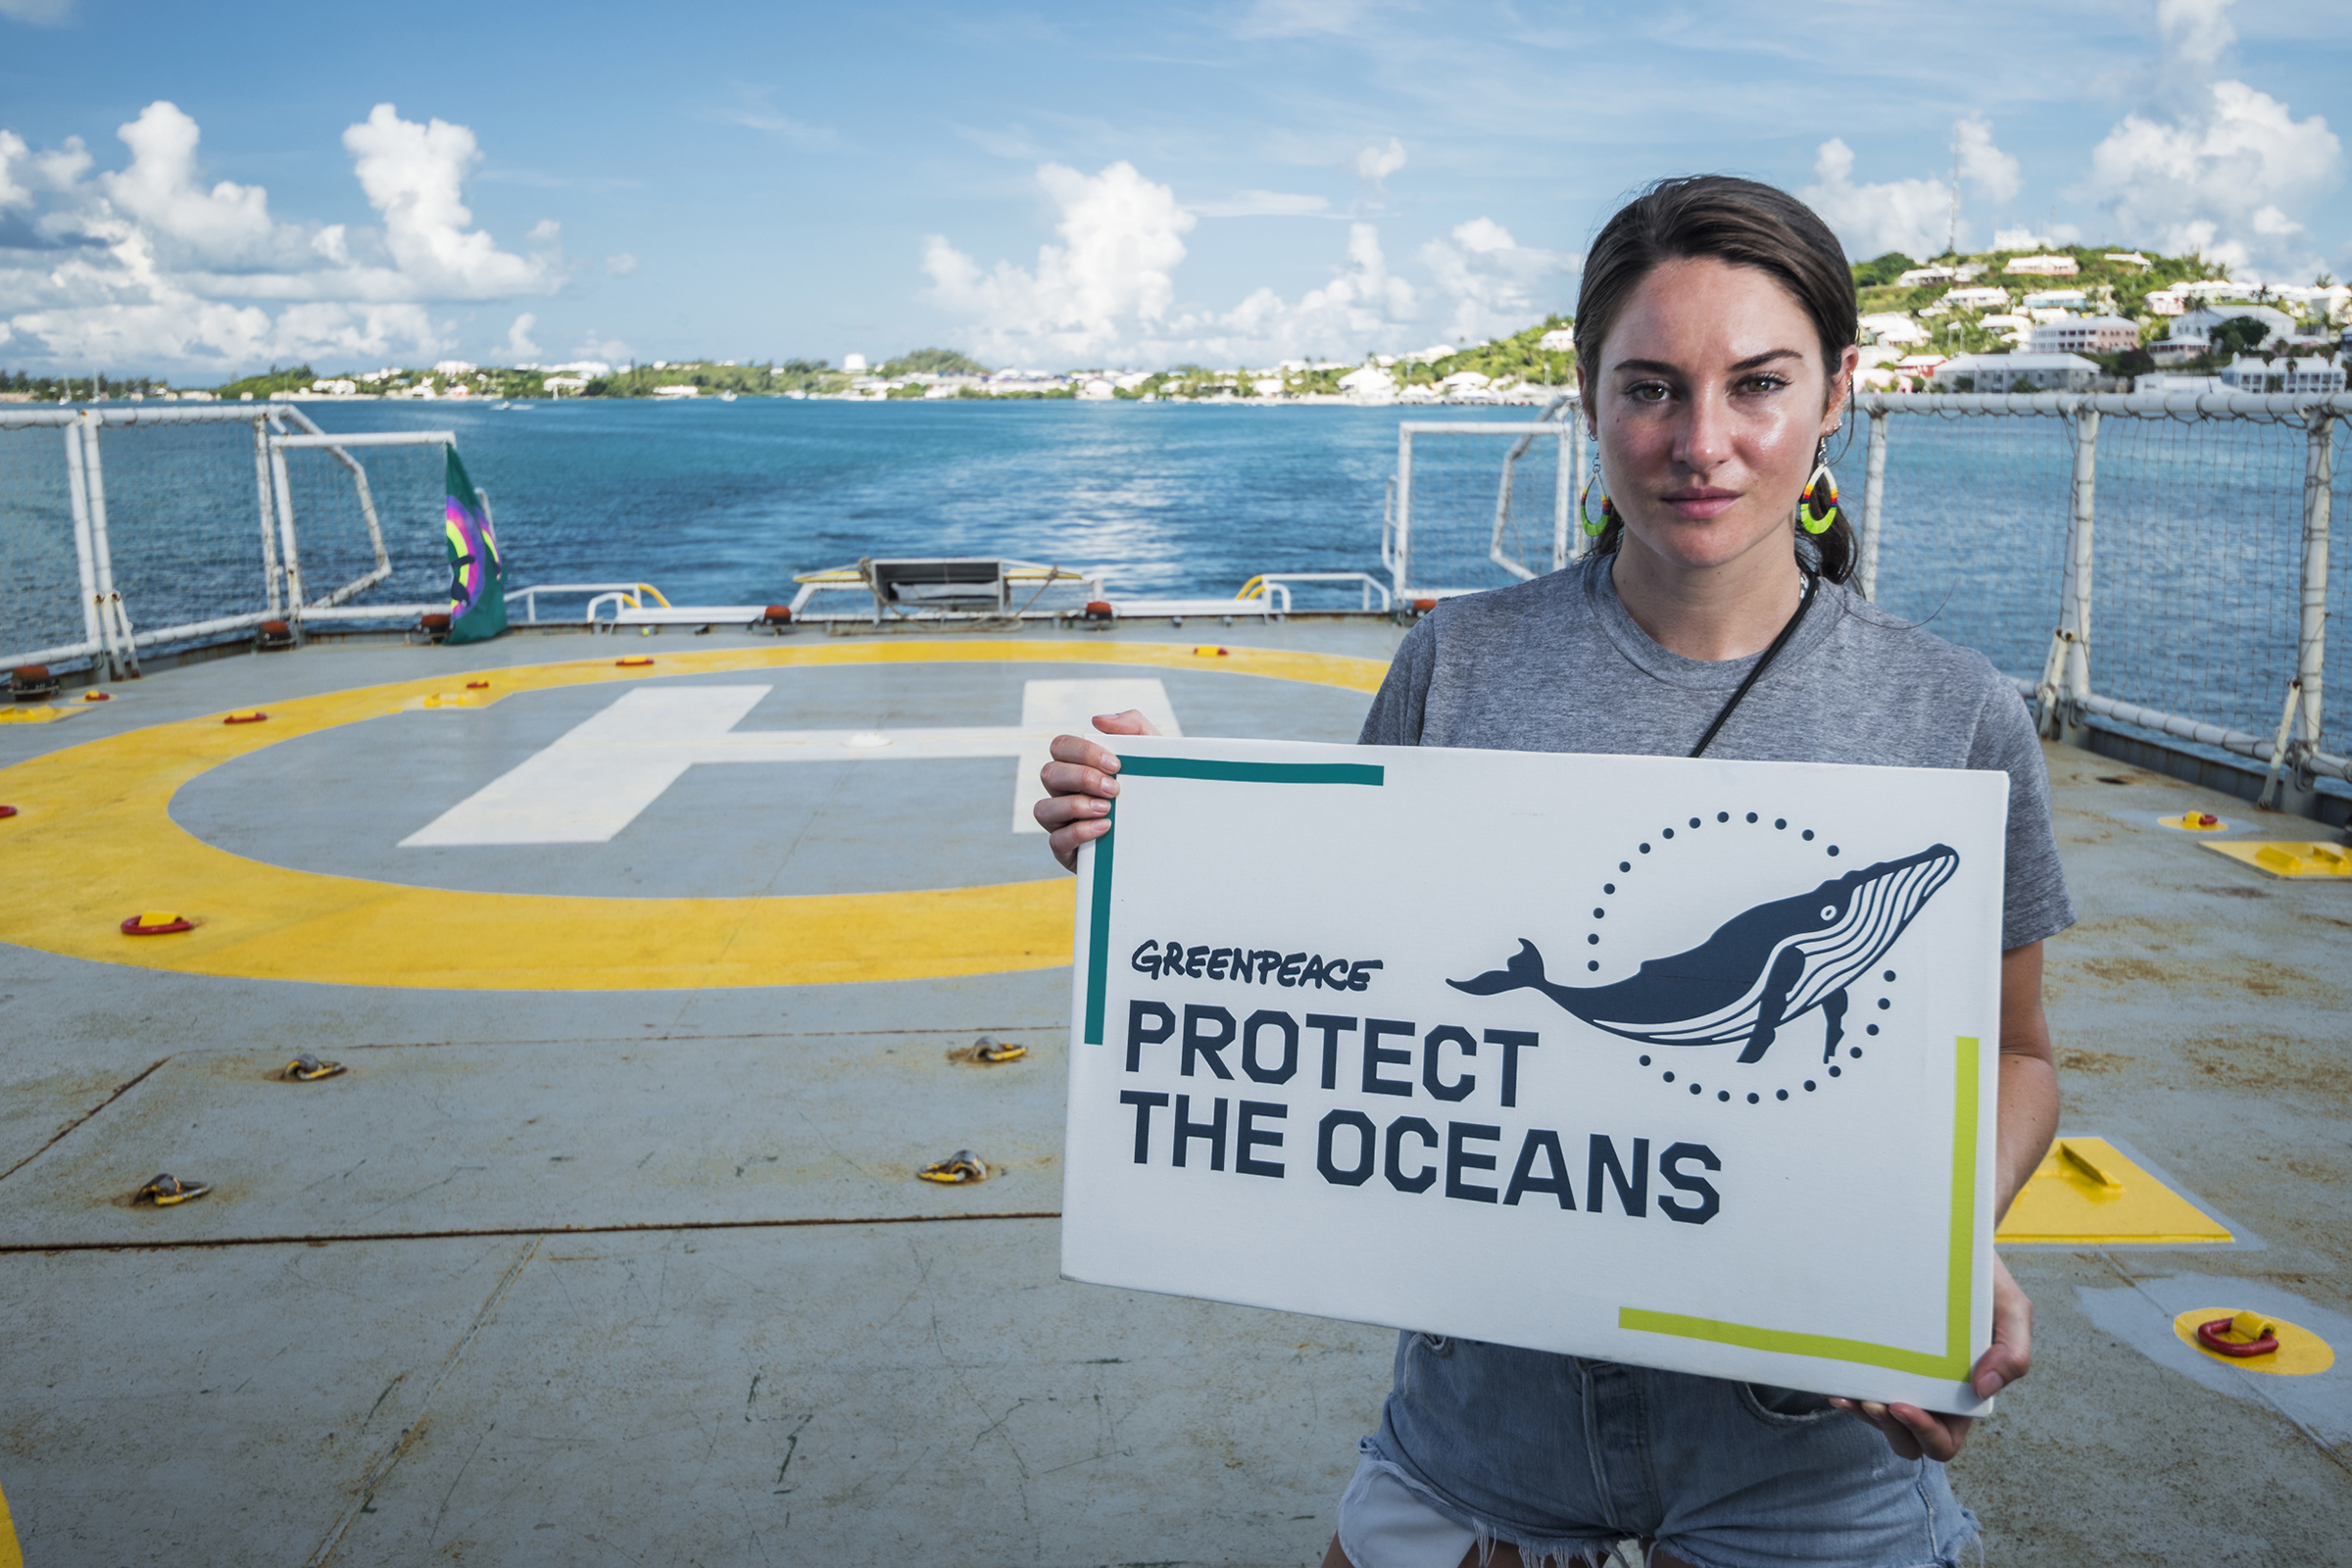 Shailene Woodley aboard the Greenpeace ship Esperanza departing Bermuda for the Sargasso Sea. The expedition will see Greenpeace and University of Florida researchers team up to study the impact of plastics and microplastics on marine life. (Shane Gross—Greenpeace)